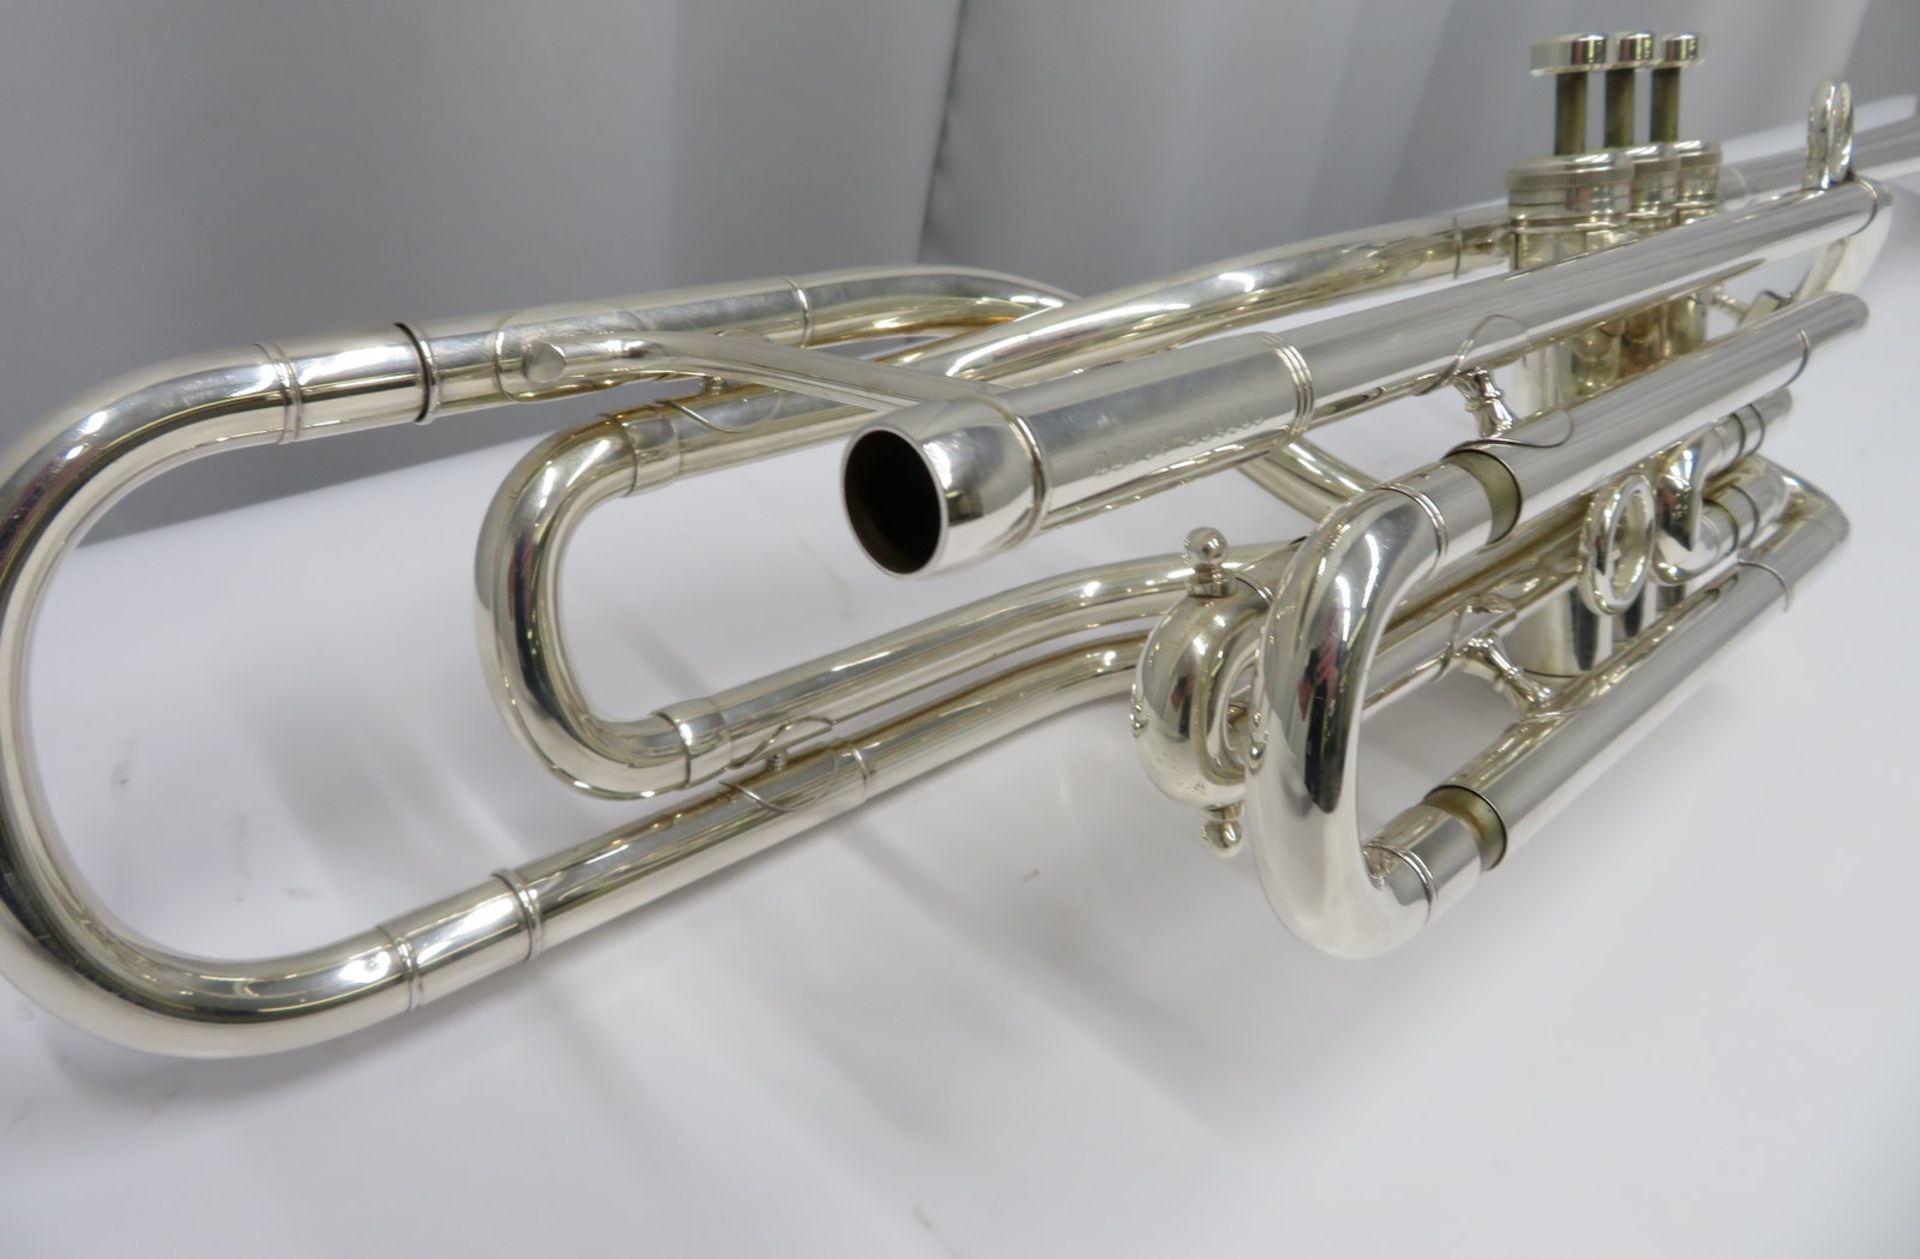 Besson International BE707 fanfare trumpet with case. Serial number: 884160. - Image 7 of 17